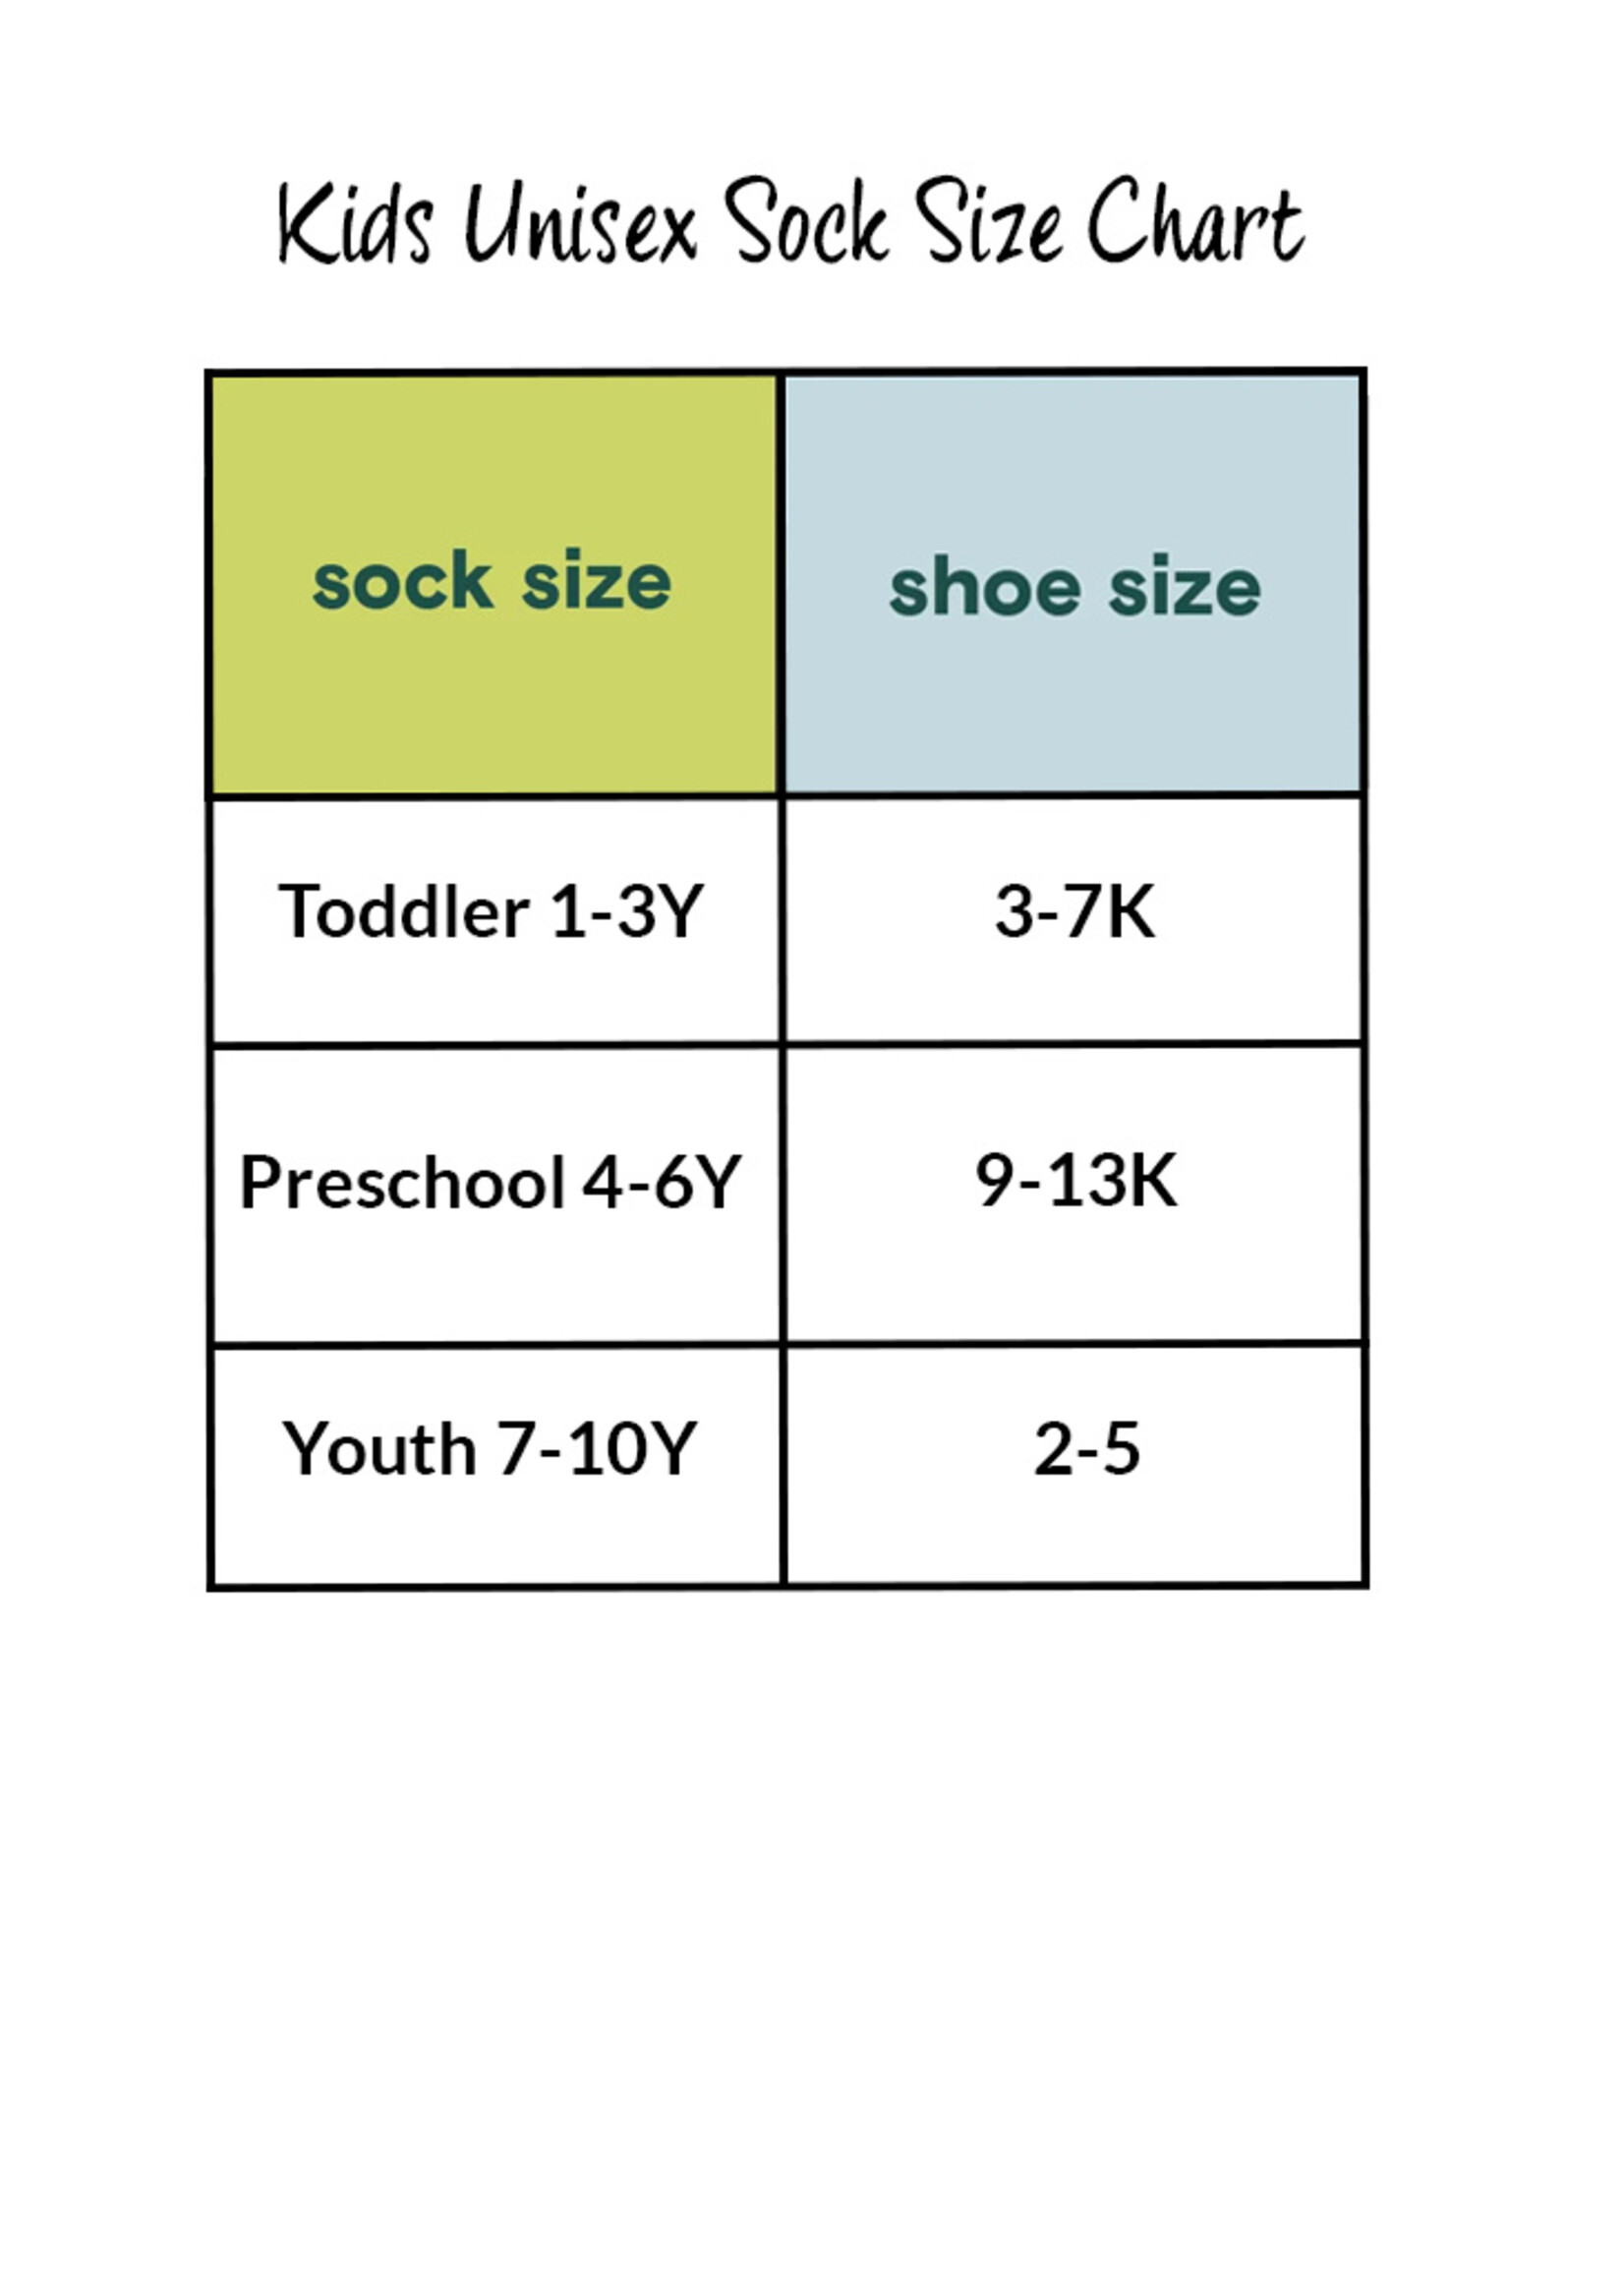 Conscious Step Kids Socks that Save Dogs - Youth